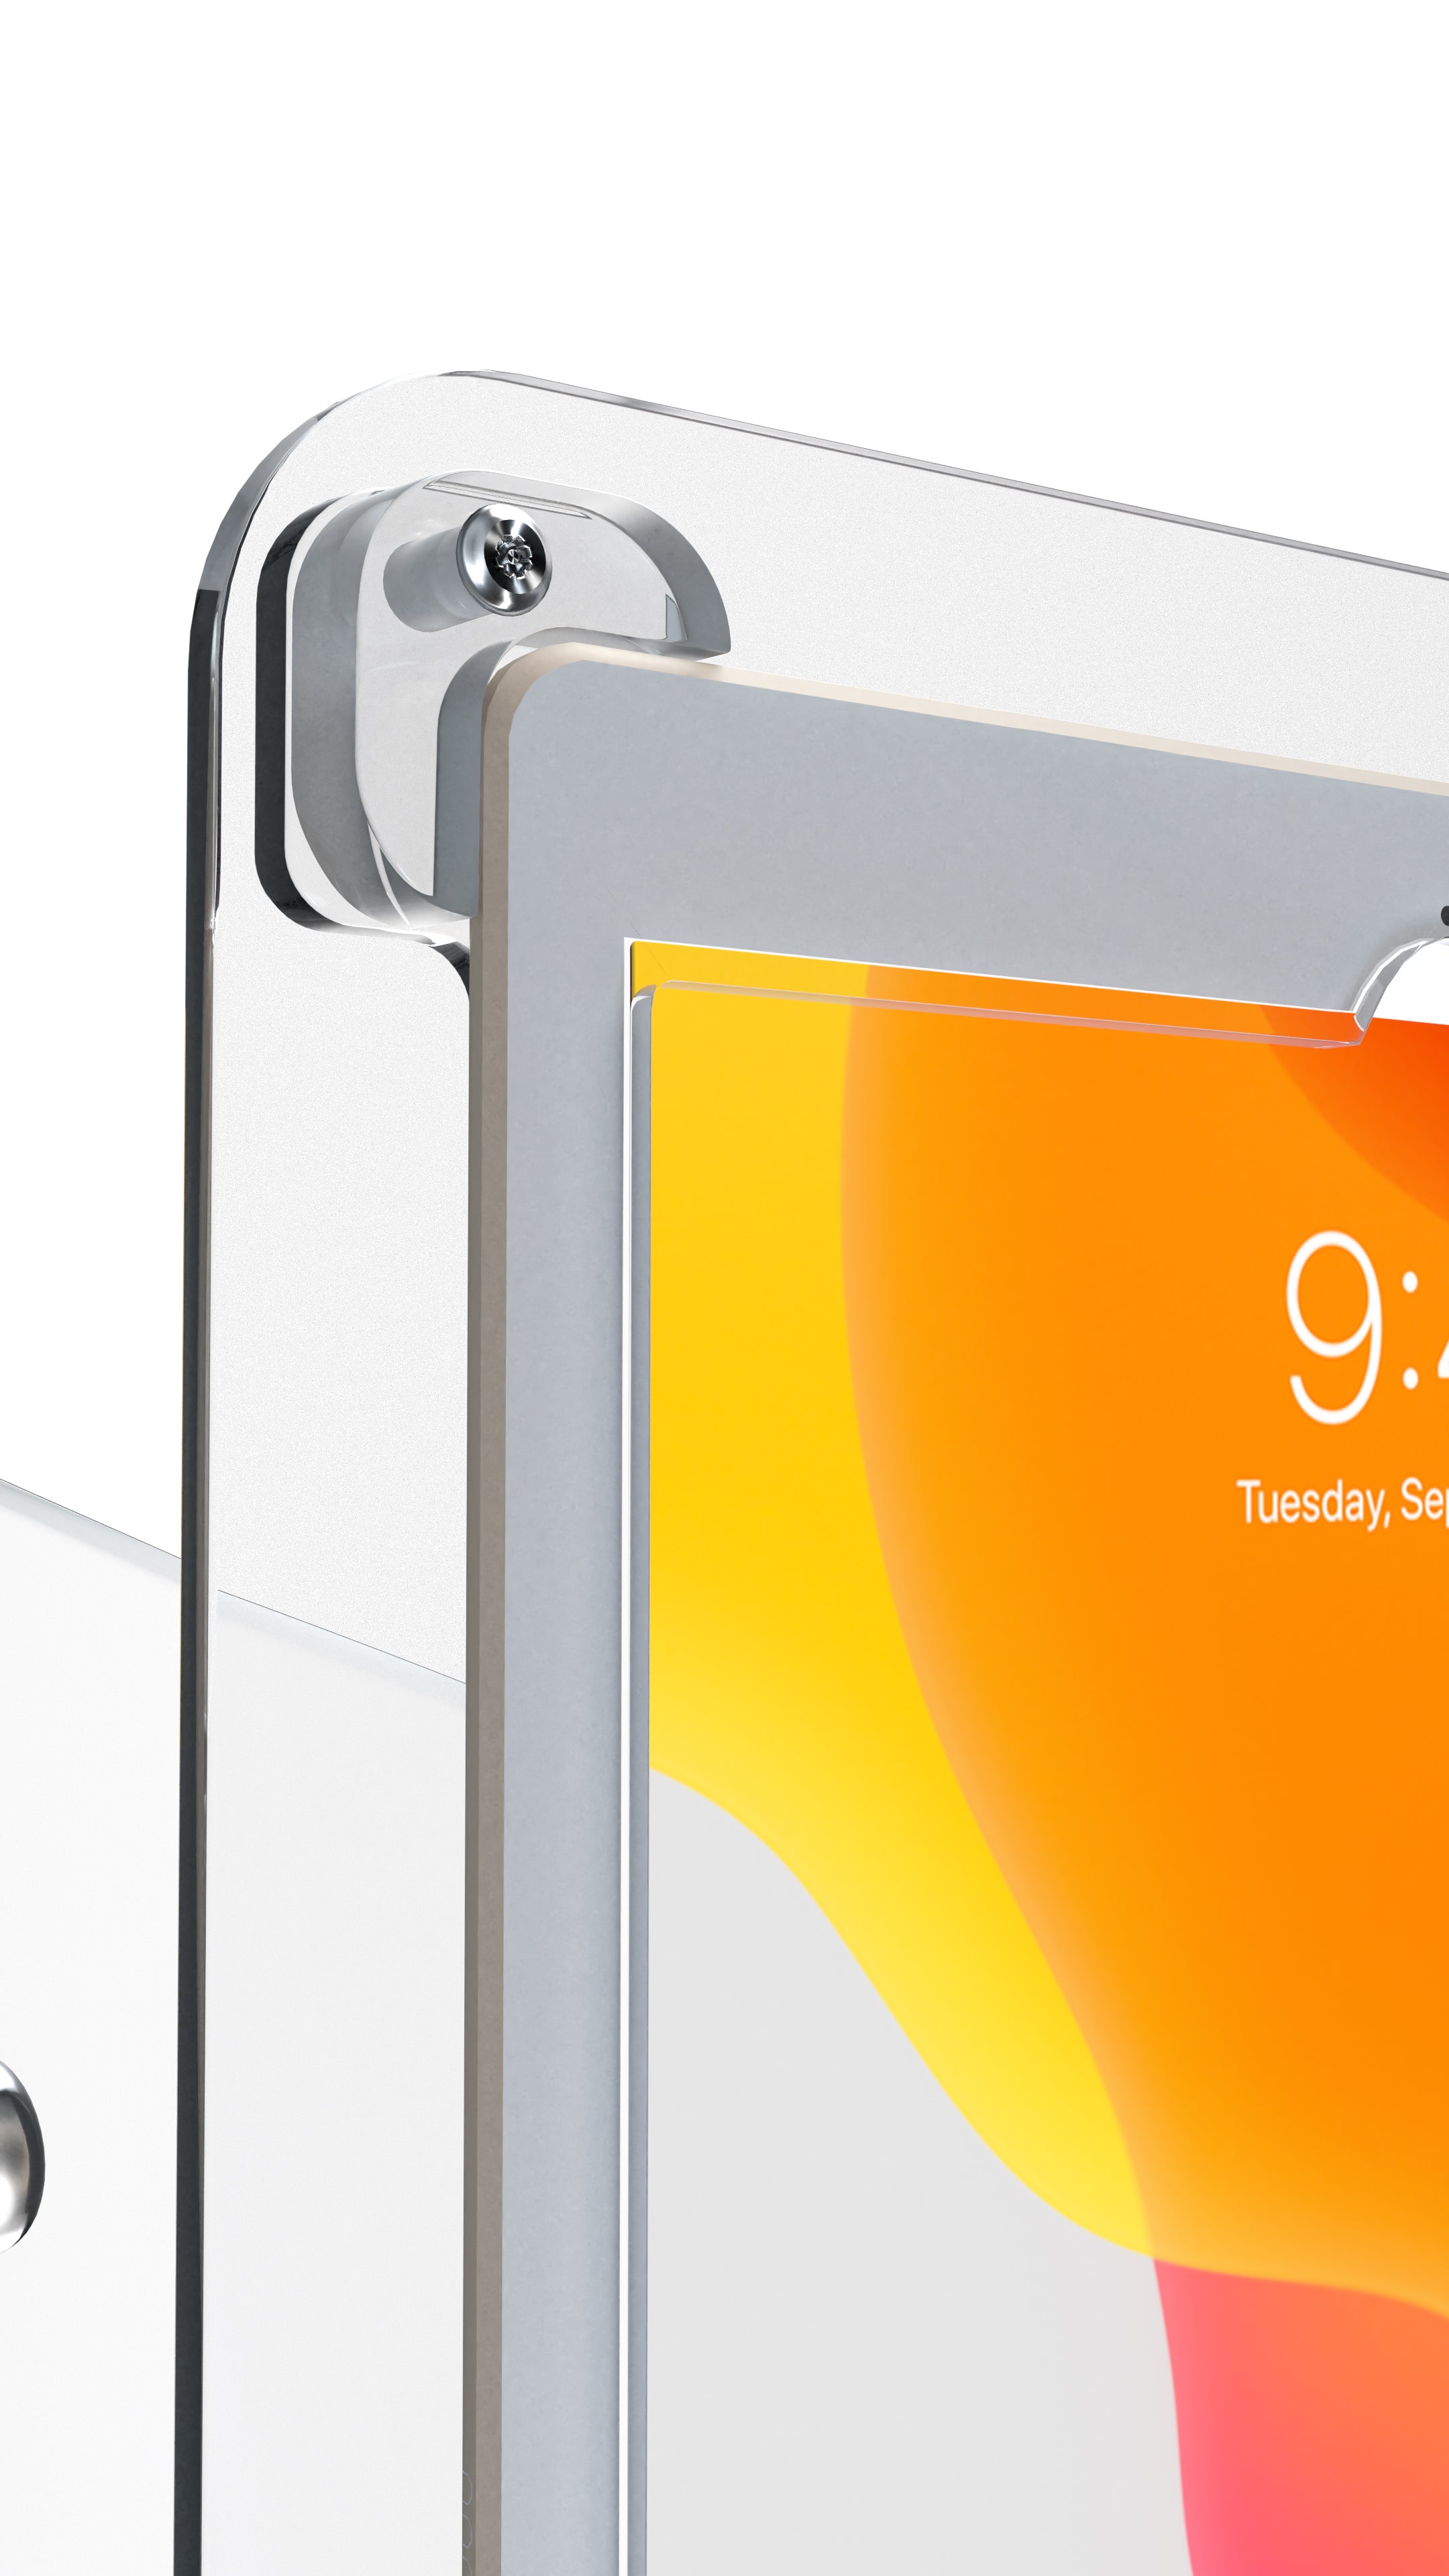 Premium Security Translucent Acrylic Wall Mount for 10.2-inch iPad 7th/ 8th/ 9th Gen & More